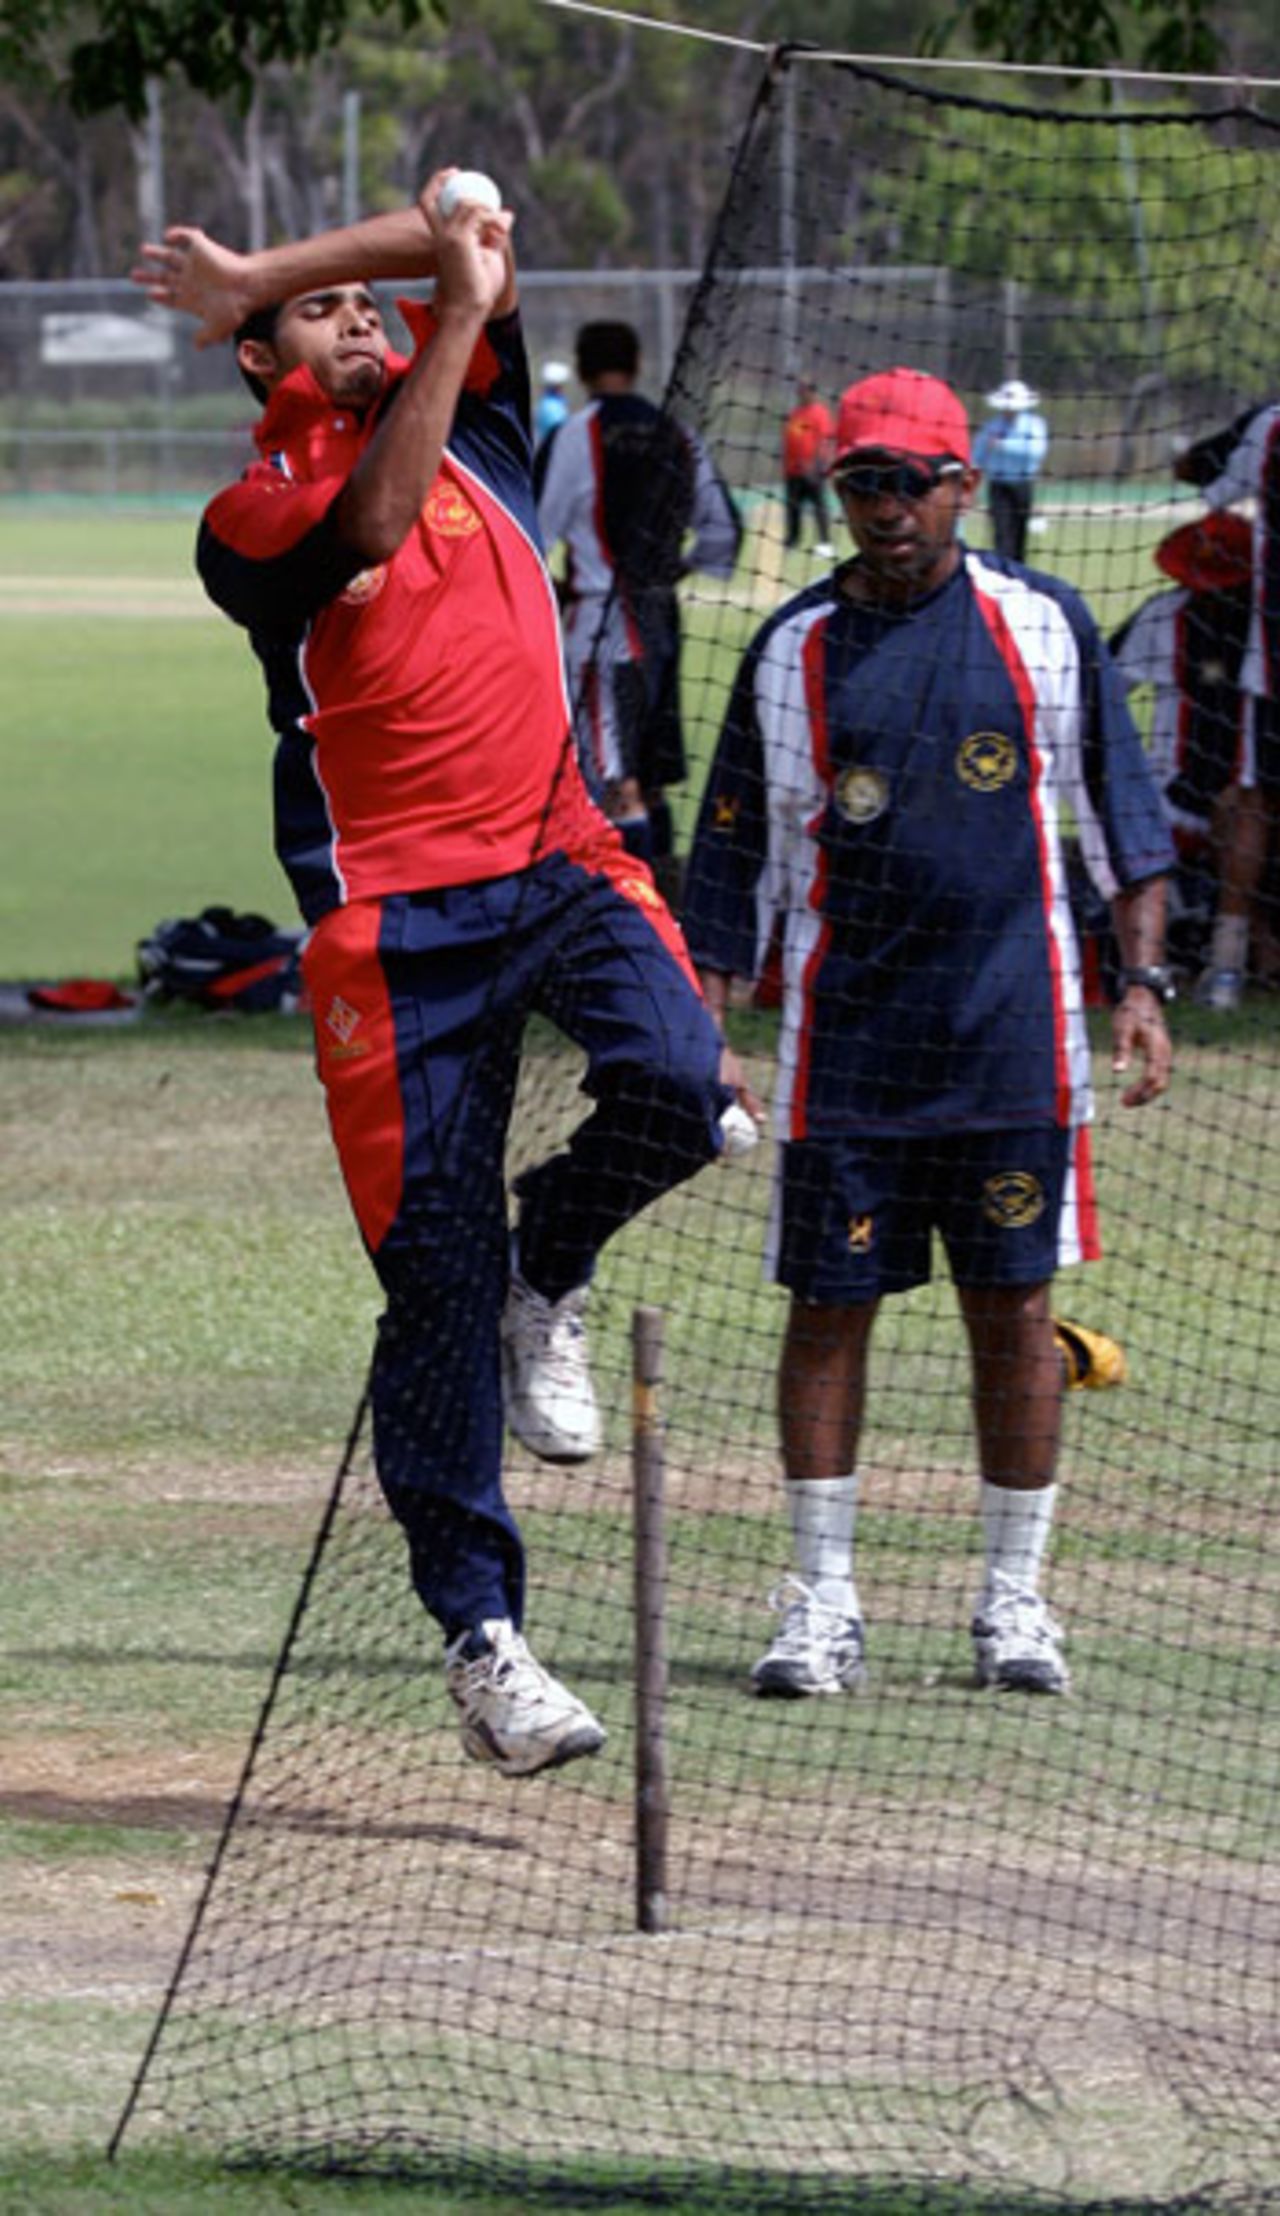 Irfan Ahmed bowls under the watchful eye of coach Sameer Dighe at the Marrara Sports Complex, Darwin